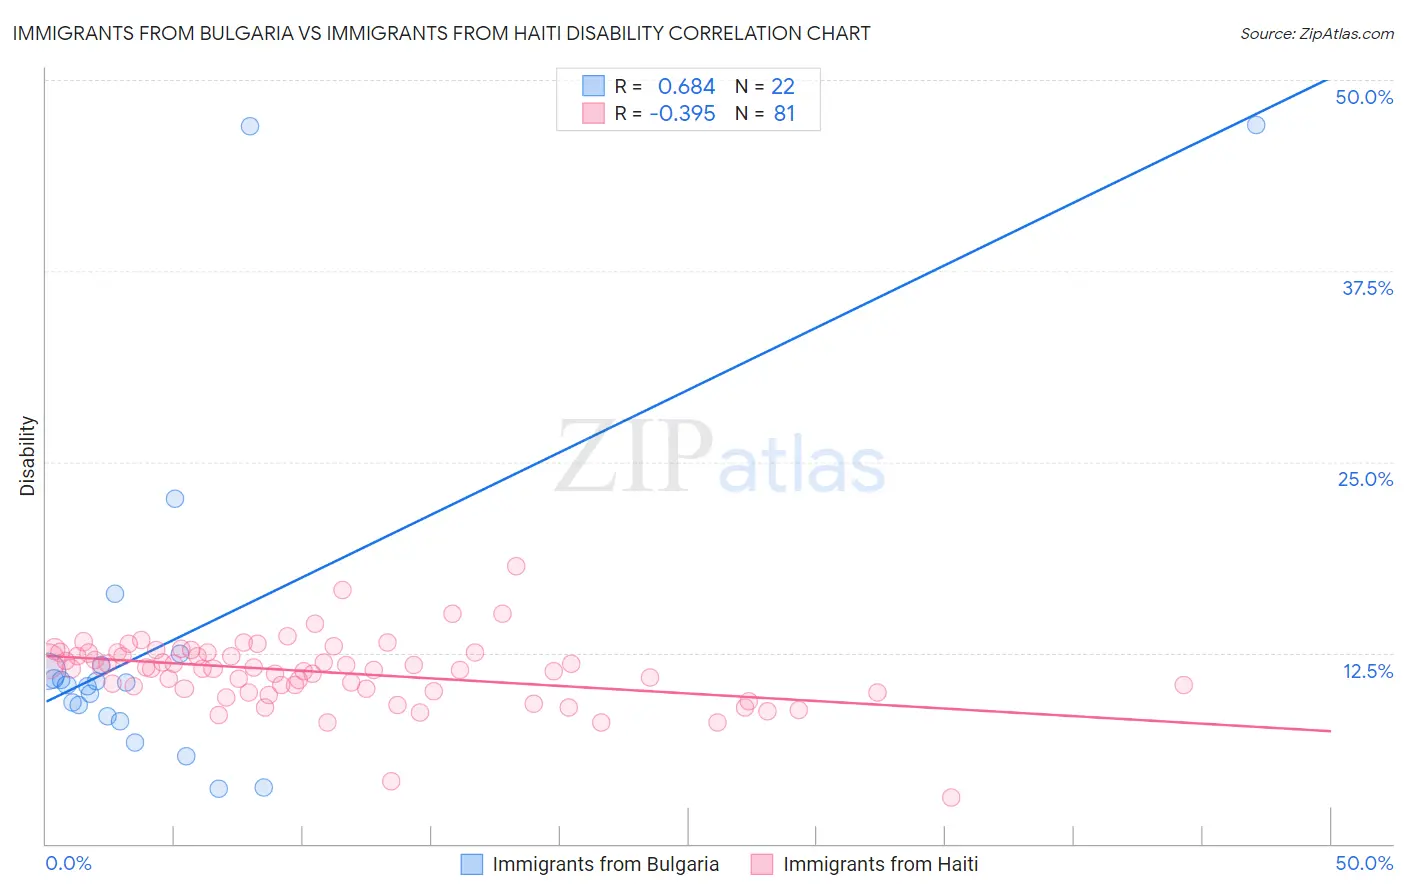 Immigrants from Bulgaria vs Immigrants from Haiti Disability